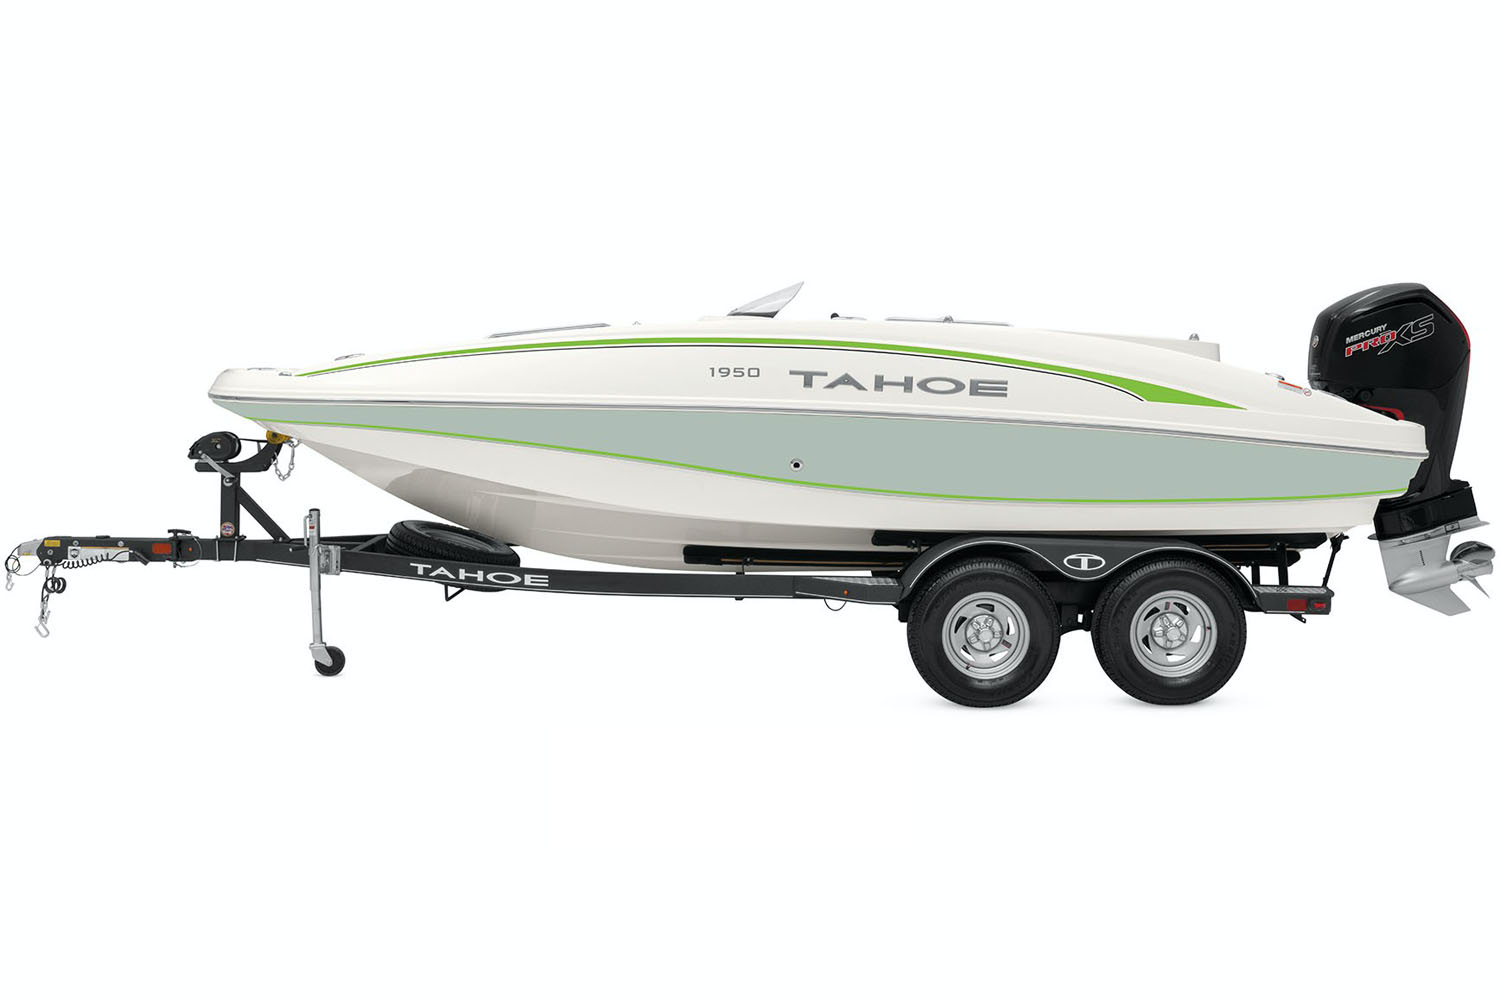 2022 Tahoe 1950 Power boat for sale in Colo Spgs, CO - image 1 